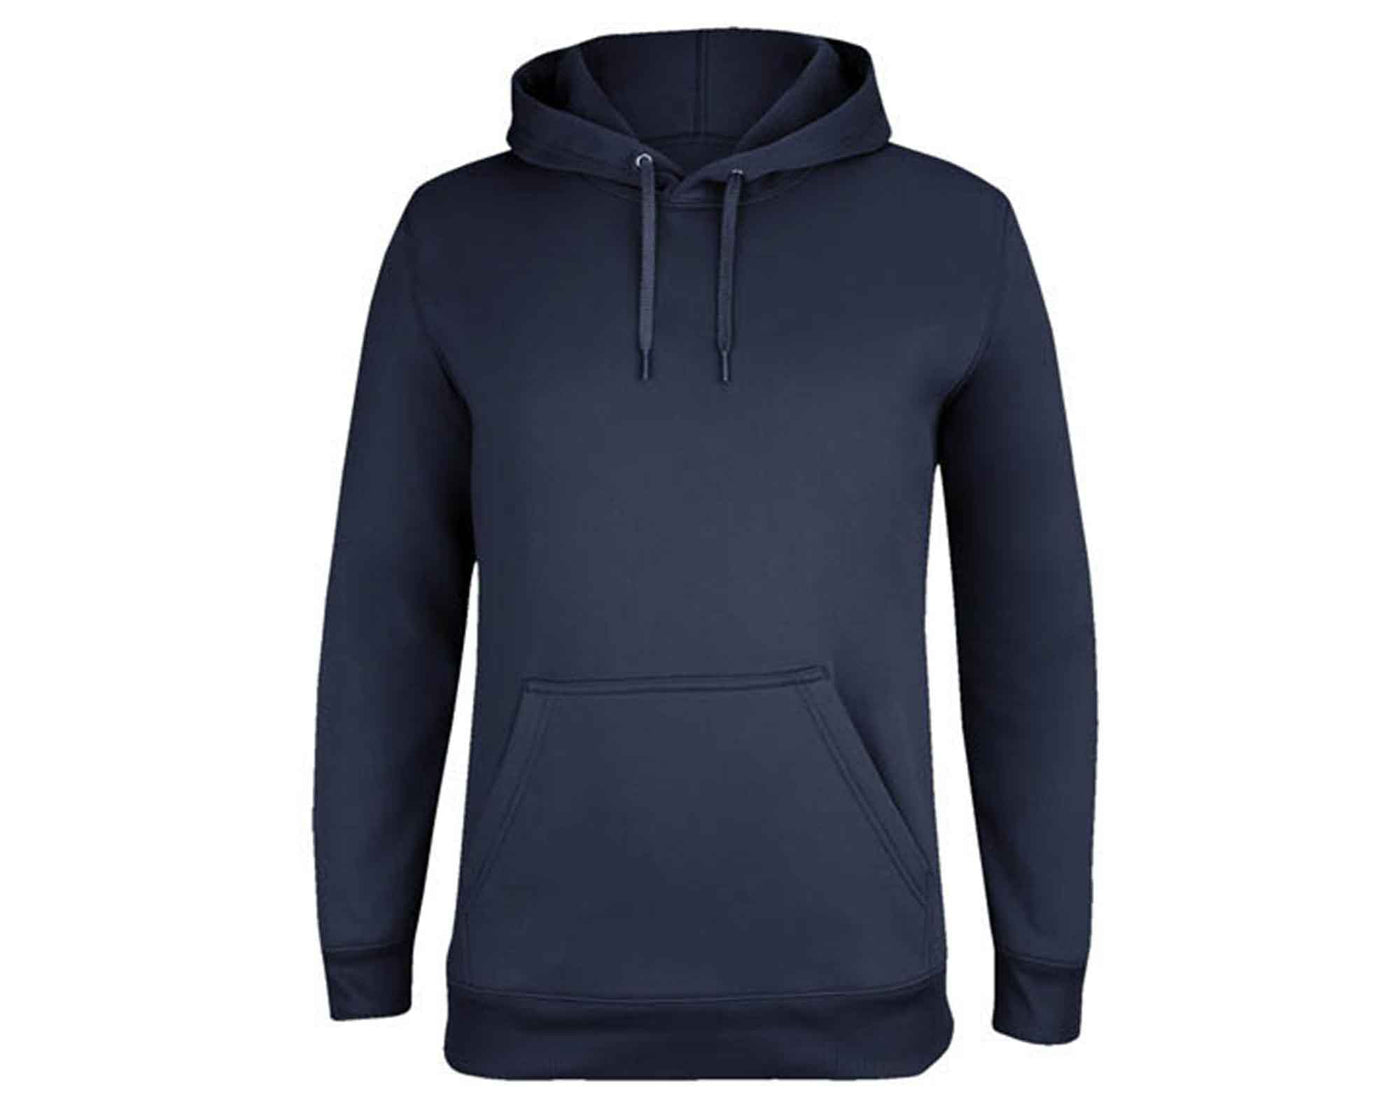 Navy blue hoody with pocket in front and drawcord